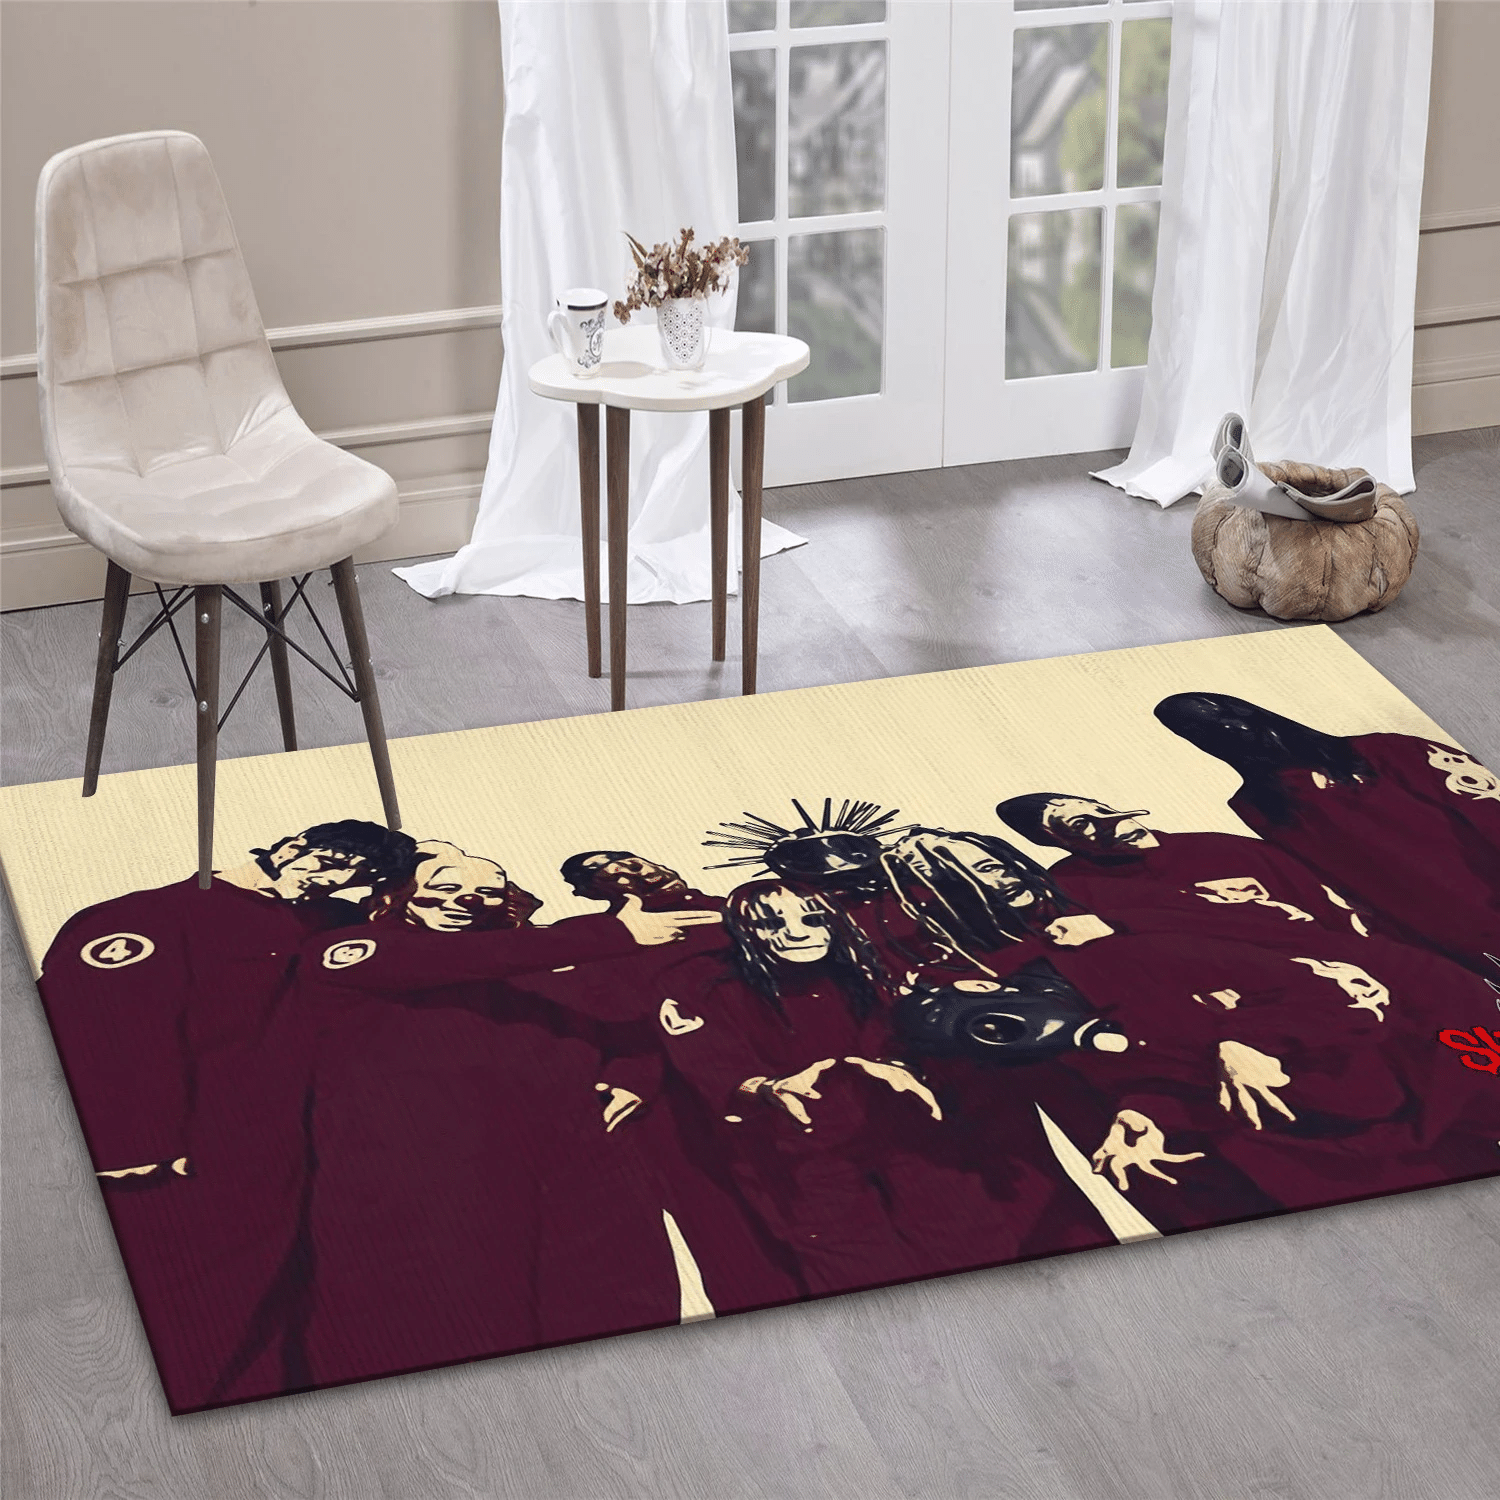 Slipknot Band 2 Music Area Rug, Living Room Rug - US Gift Decor - Indoor Outdoor Rugs 